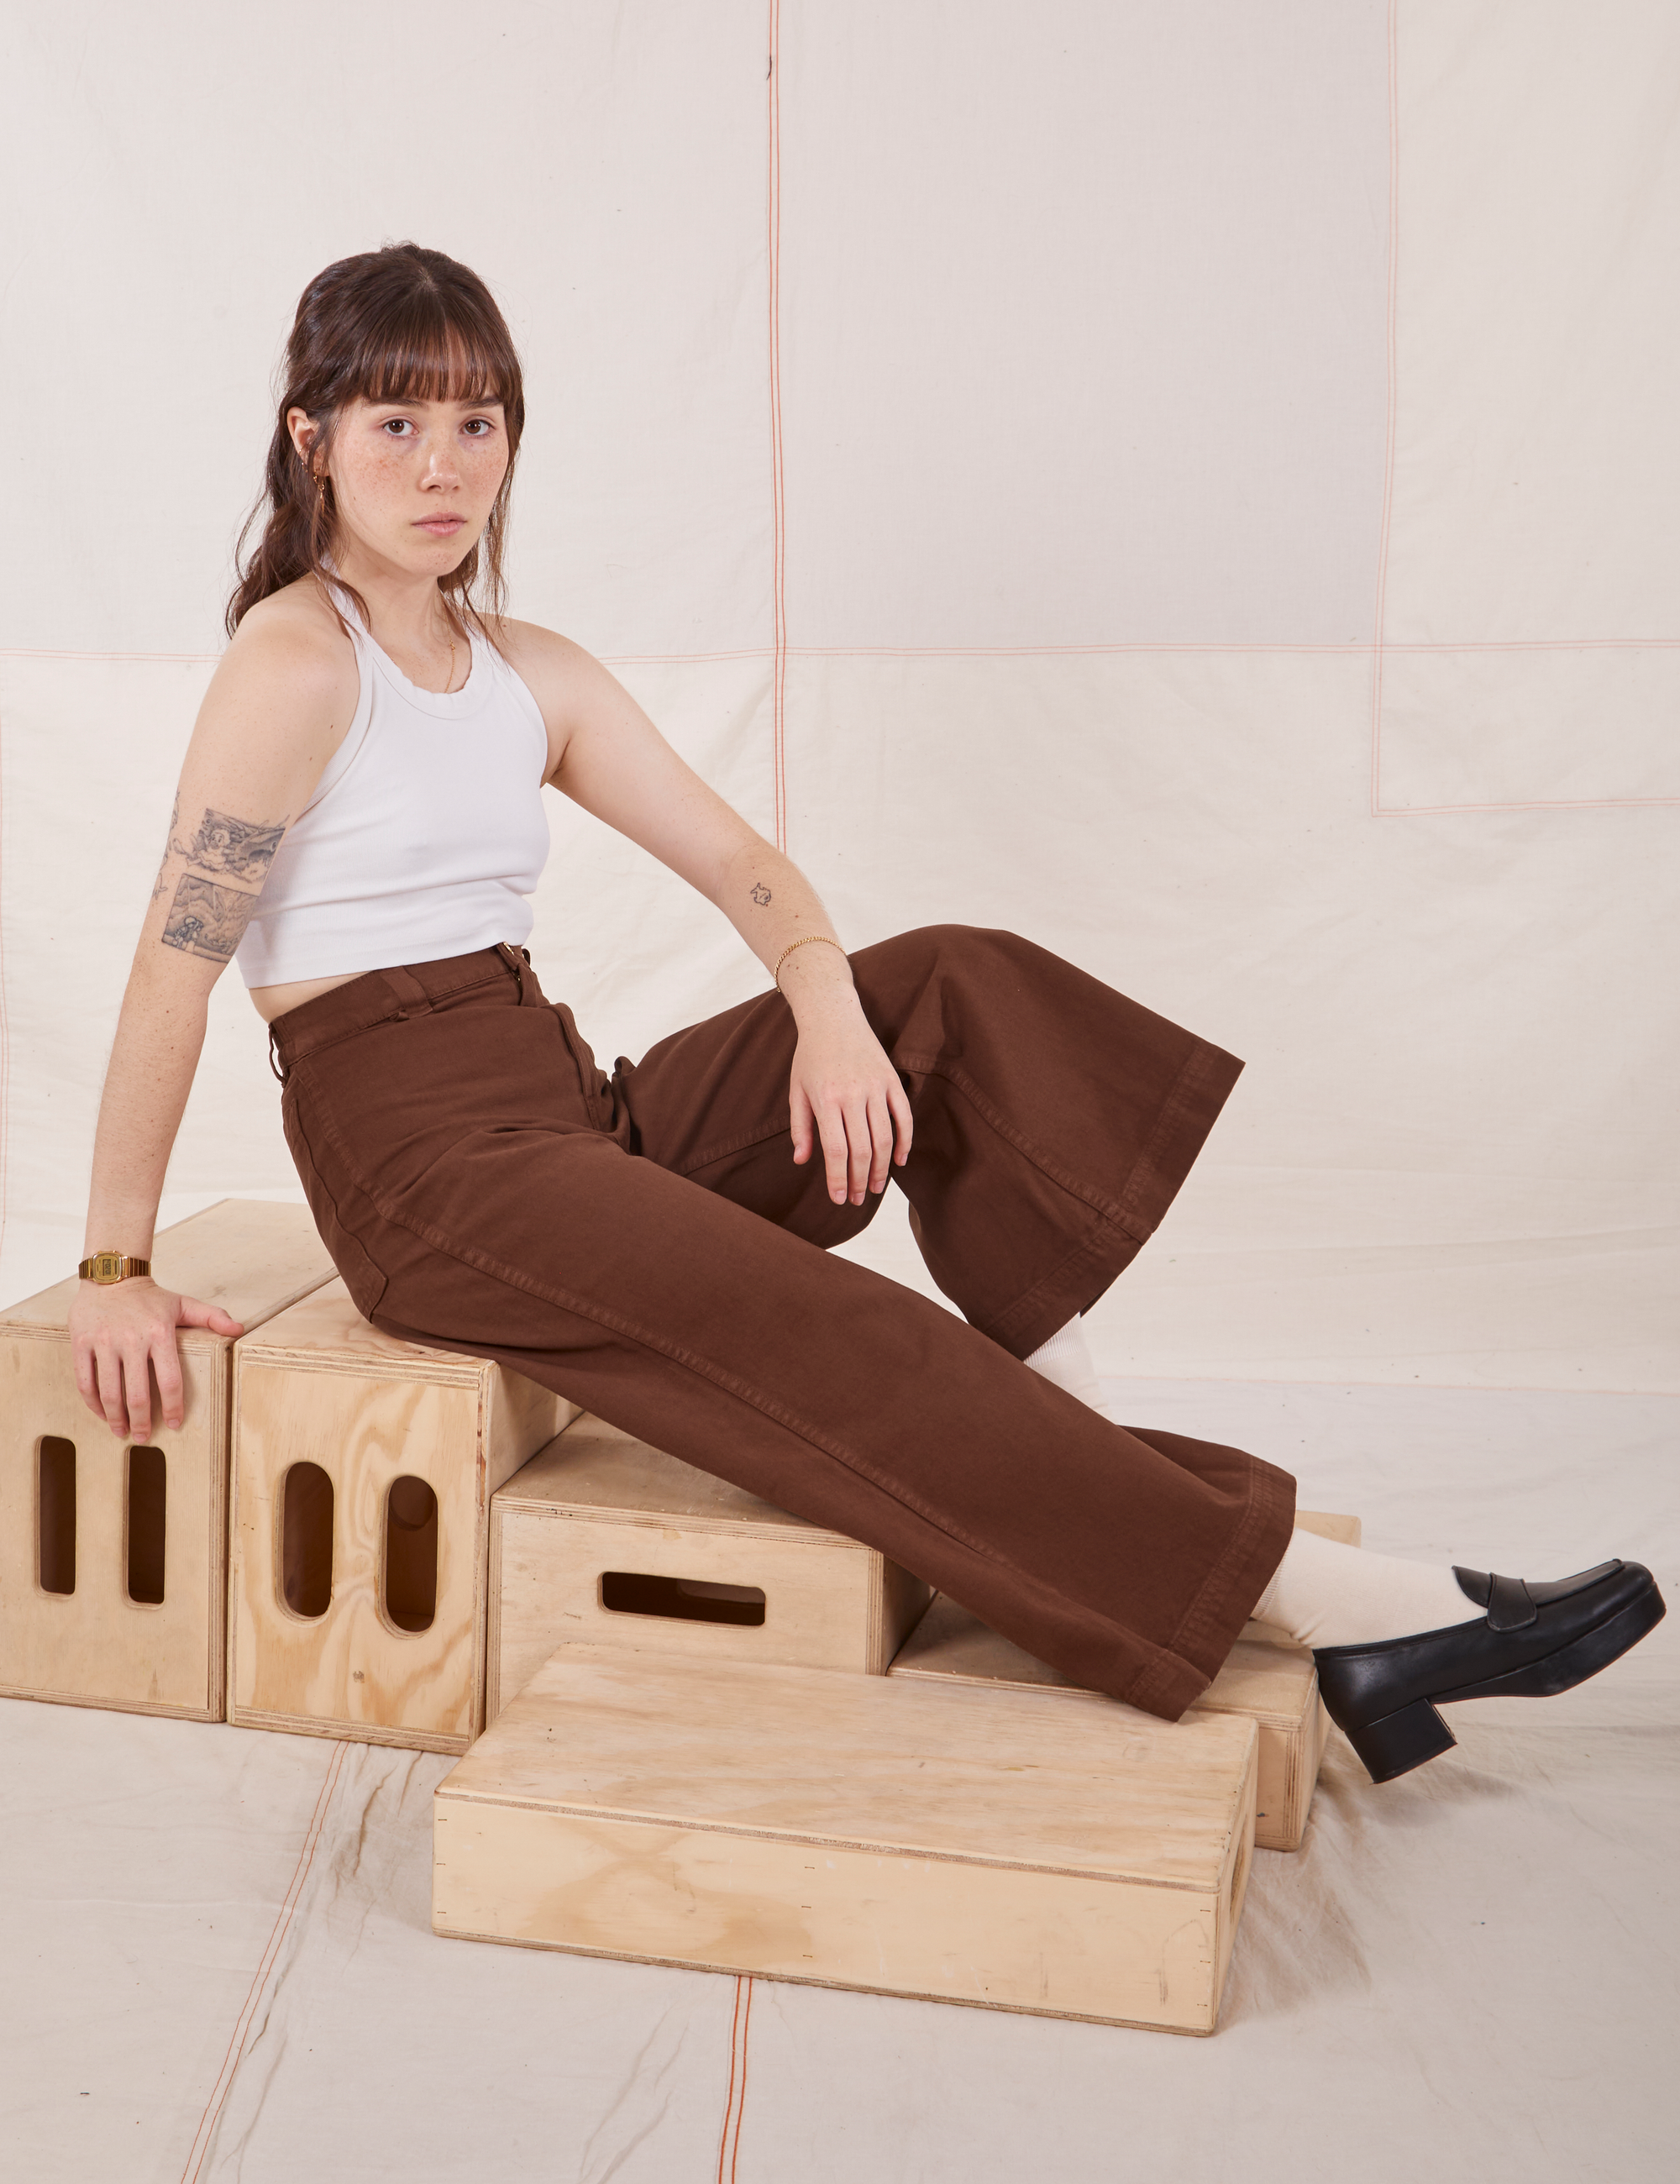 Hana is wearing Petite Bell Bottoms in Fudgesicle Brown and vintage off-white Halter Top